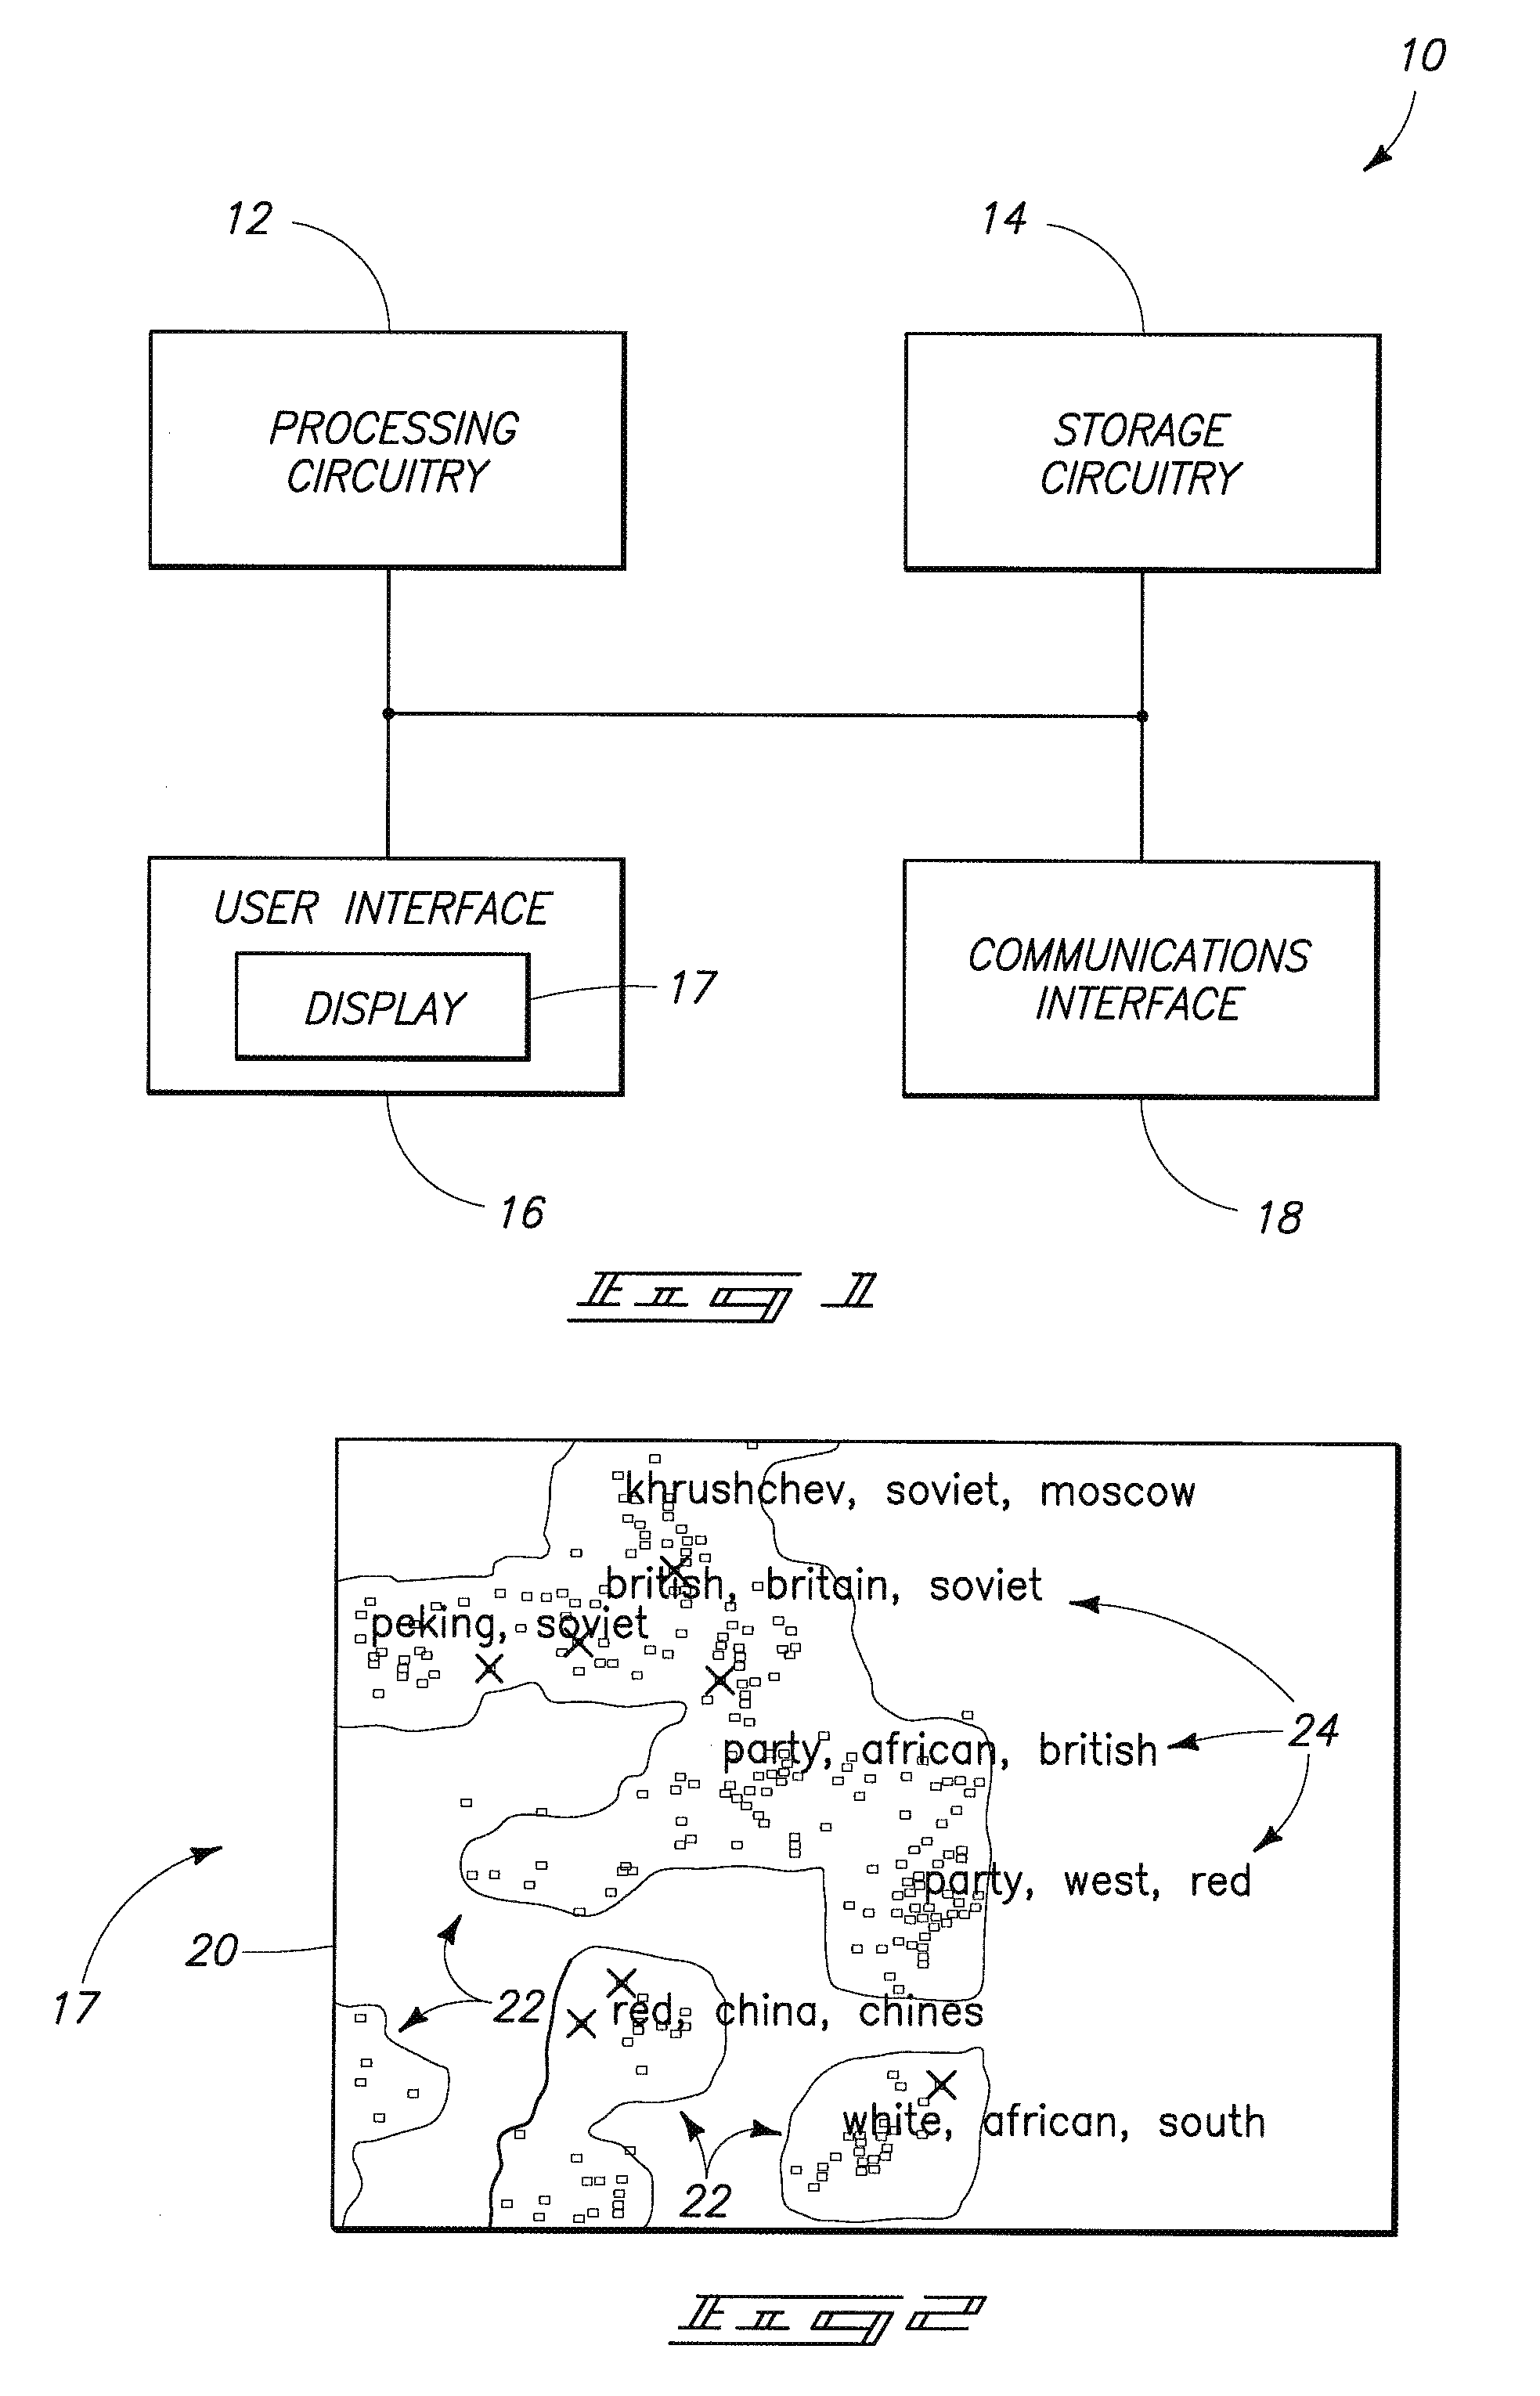 Document clustering methods, document cluster label disambiguation methods, document clustering apparatuses, and articles of manufacture